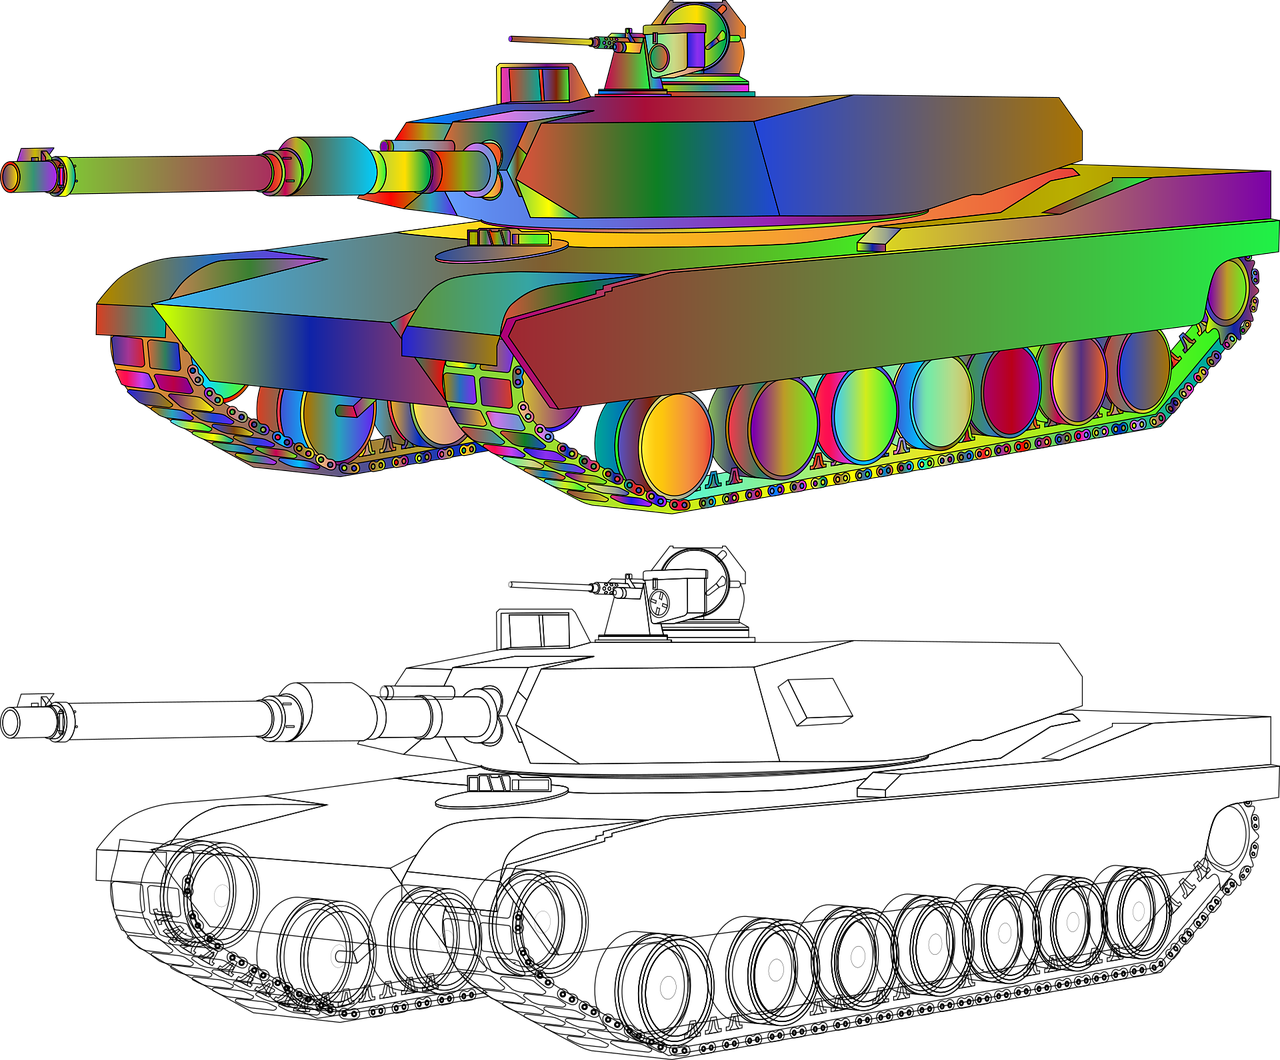 a close up of a tank on a black background, a raytraced image, digital art, rainbow colored, phone photo, outline drawing, high definition screenshot